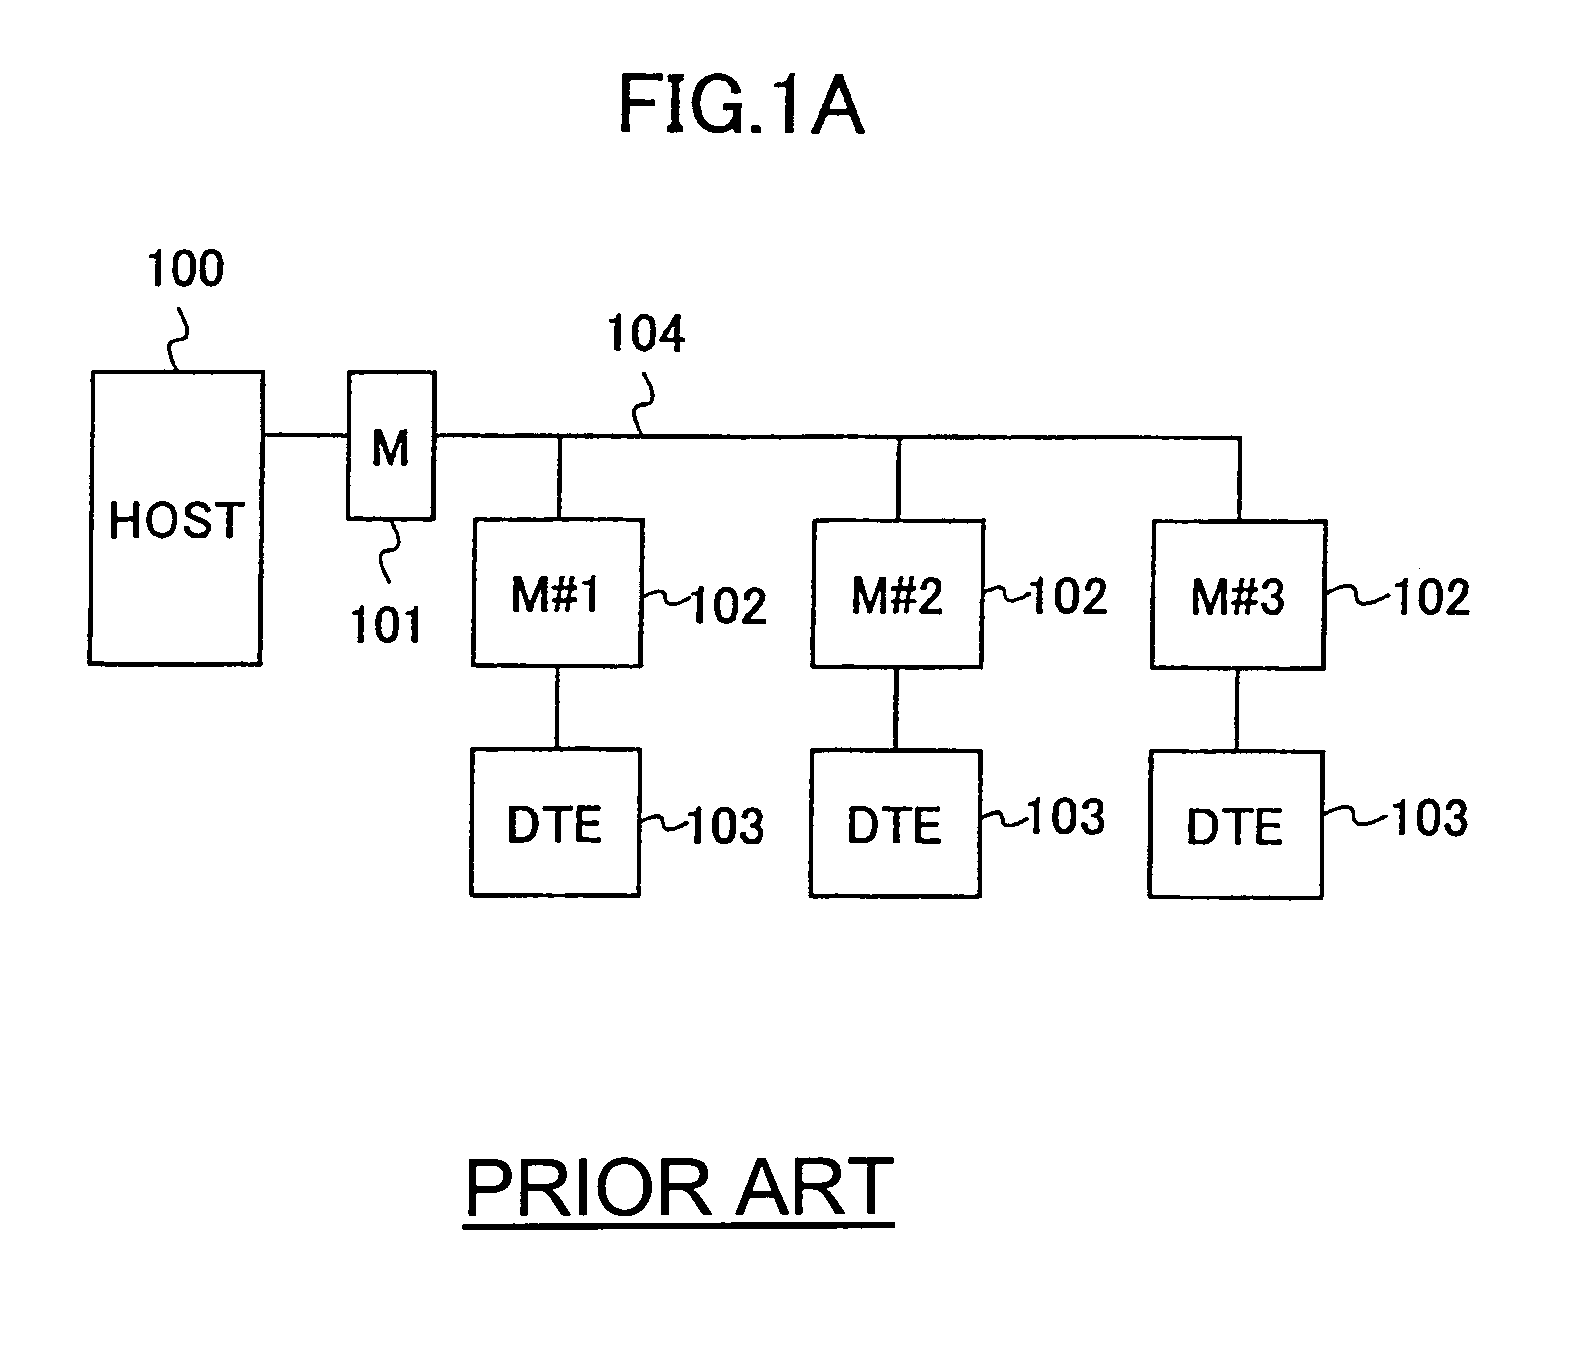 Polling communication system and polling control method